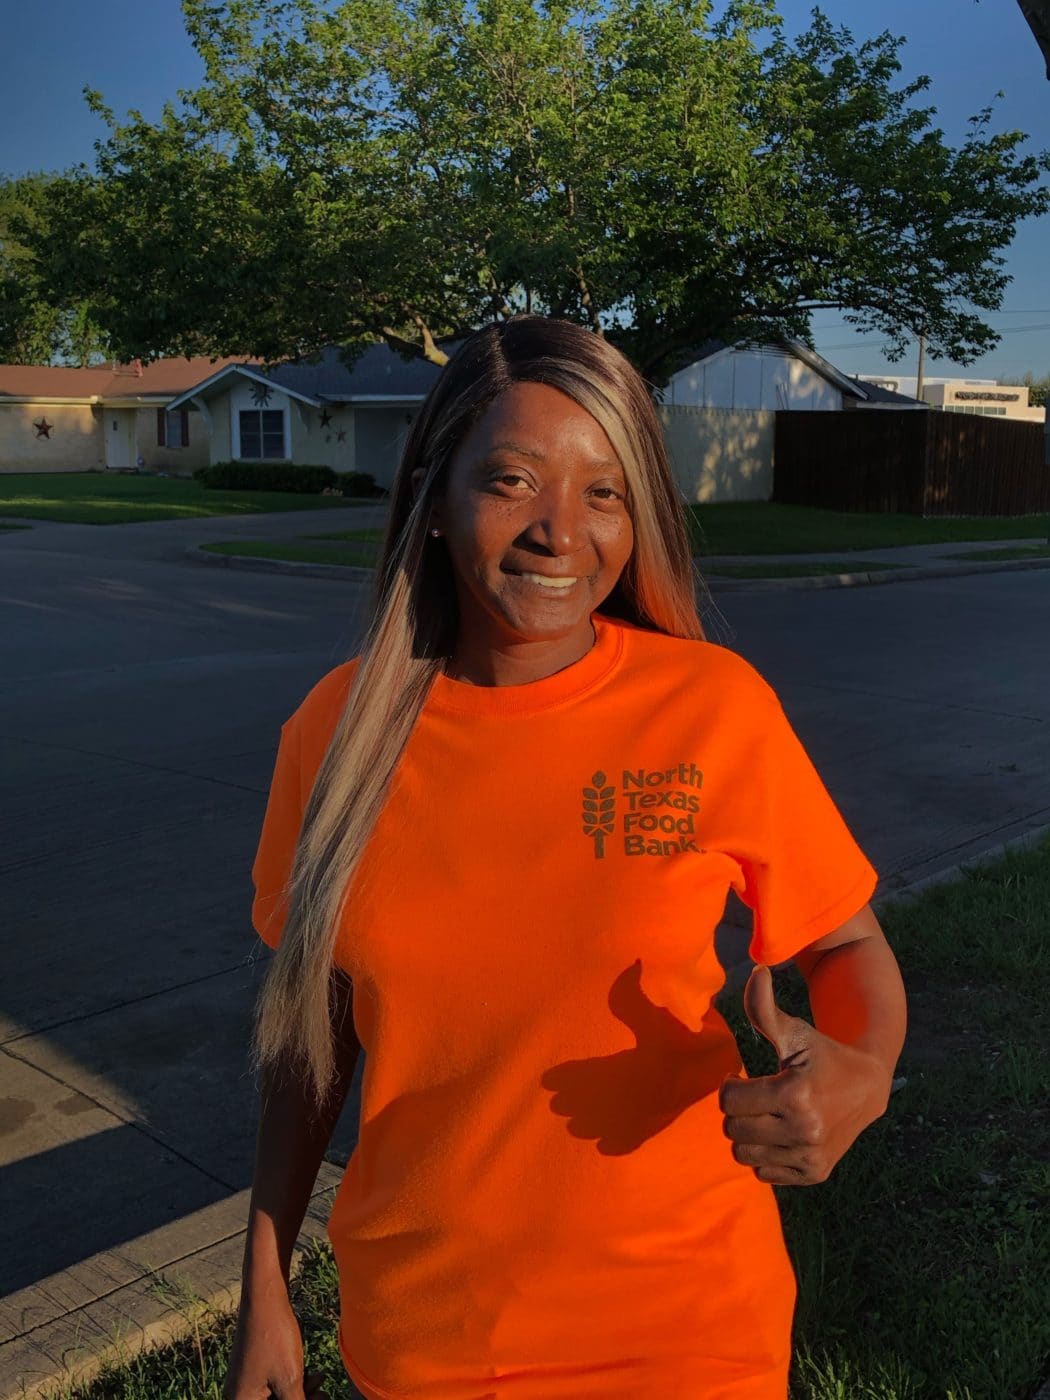 Woman wearing an orange North Texas Food Bank t-shirt smiling and giving a thumbs up